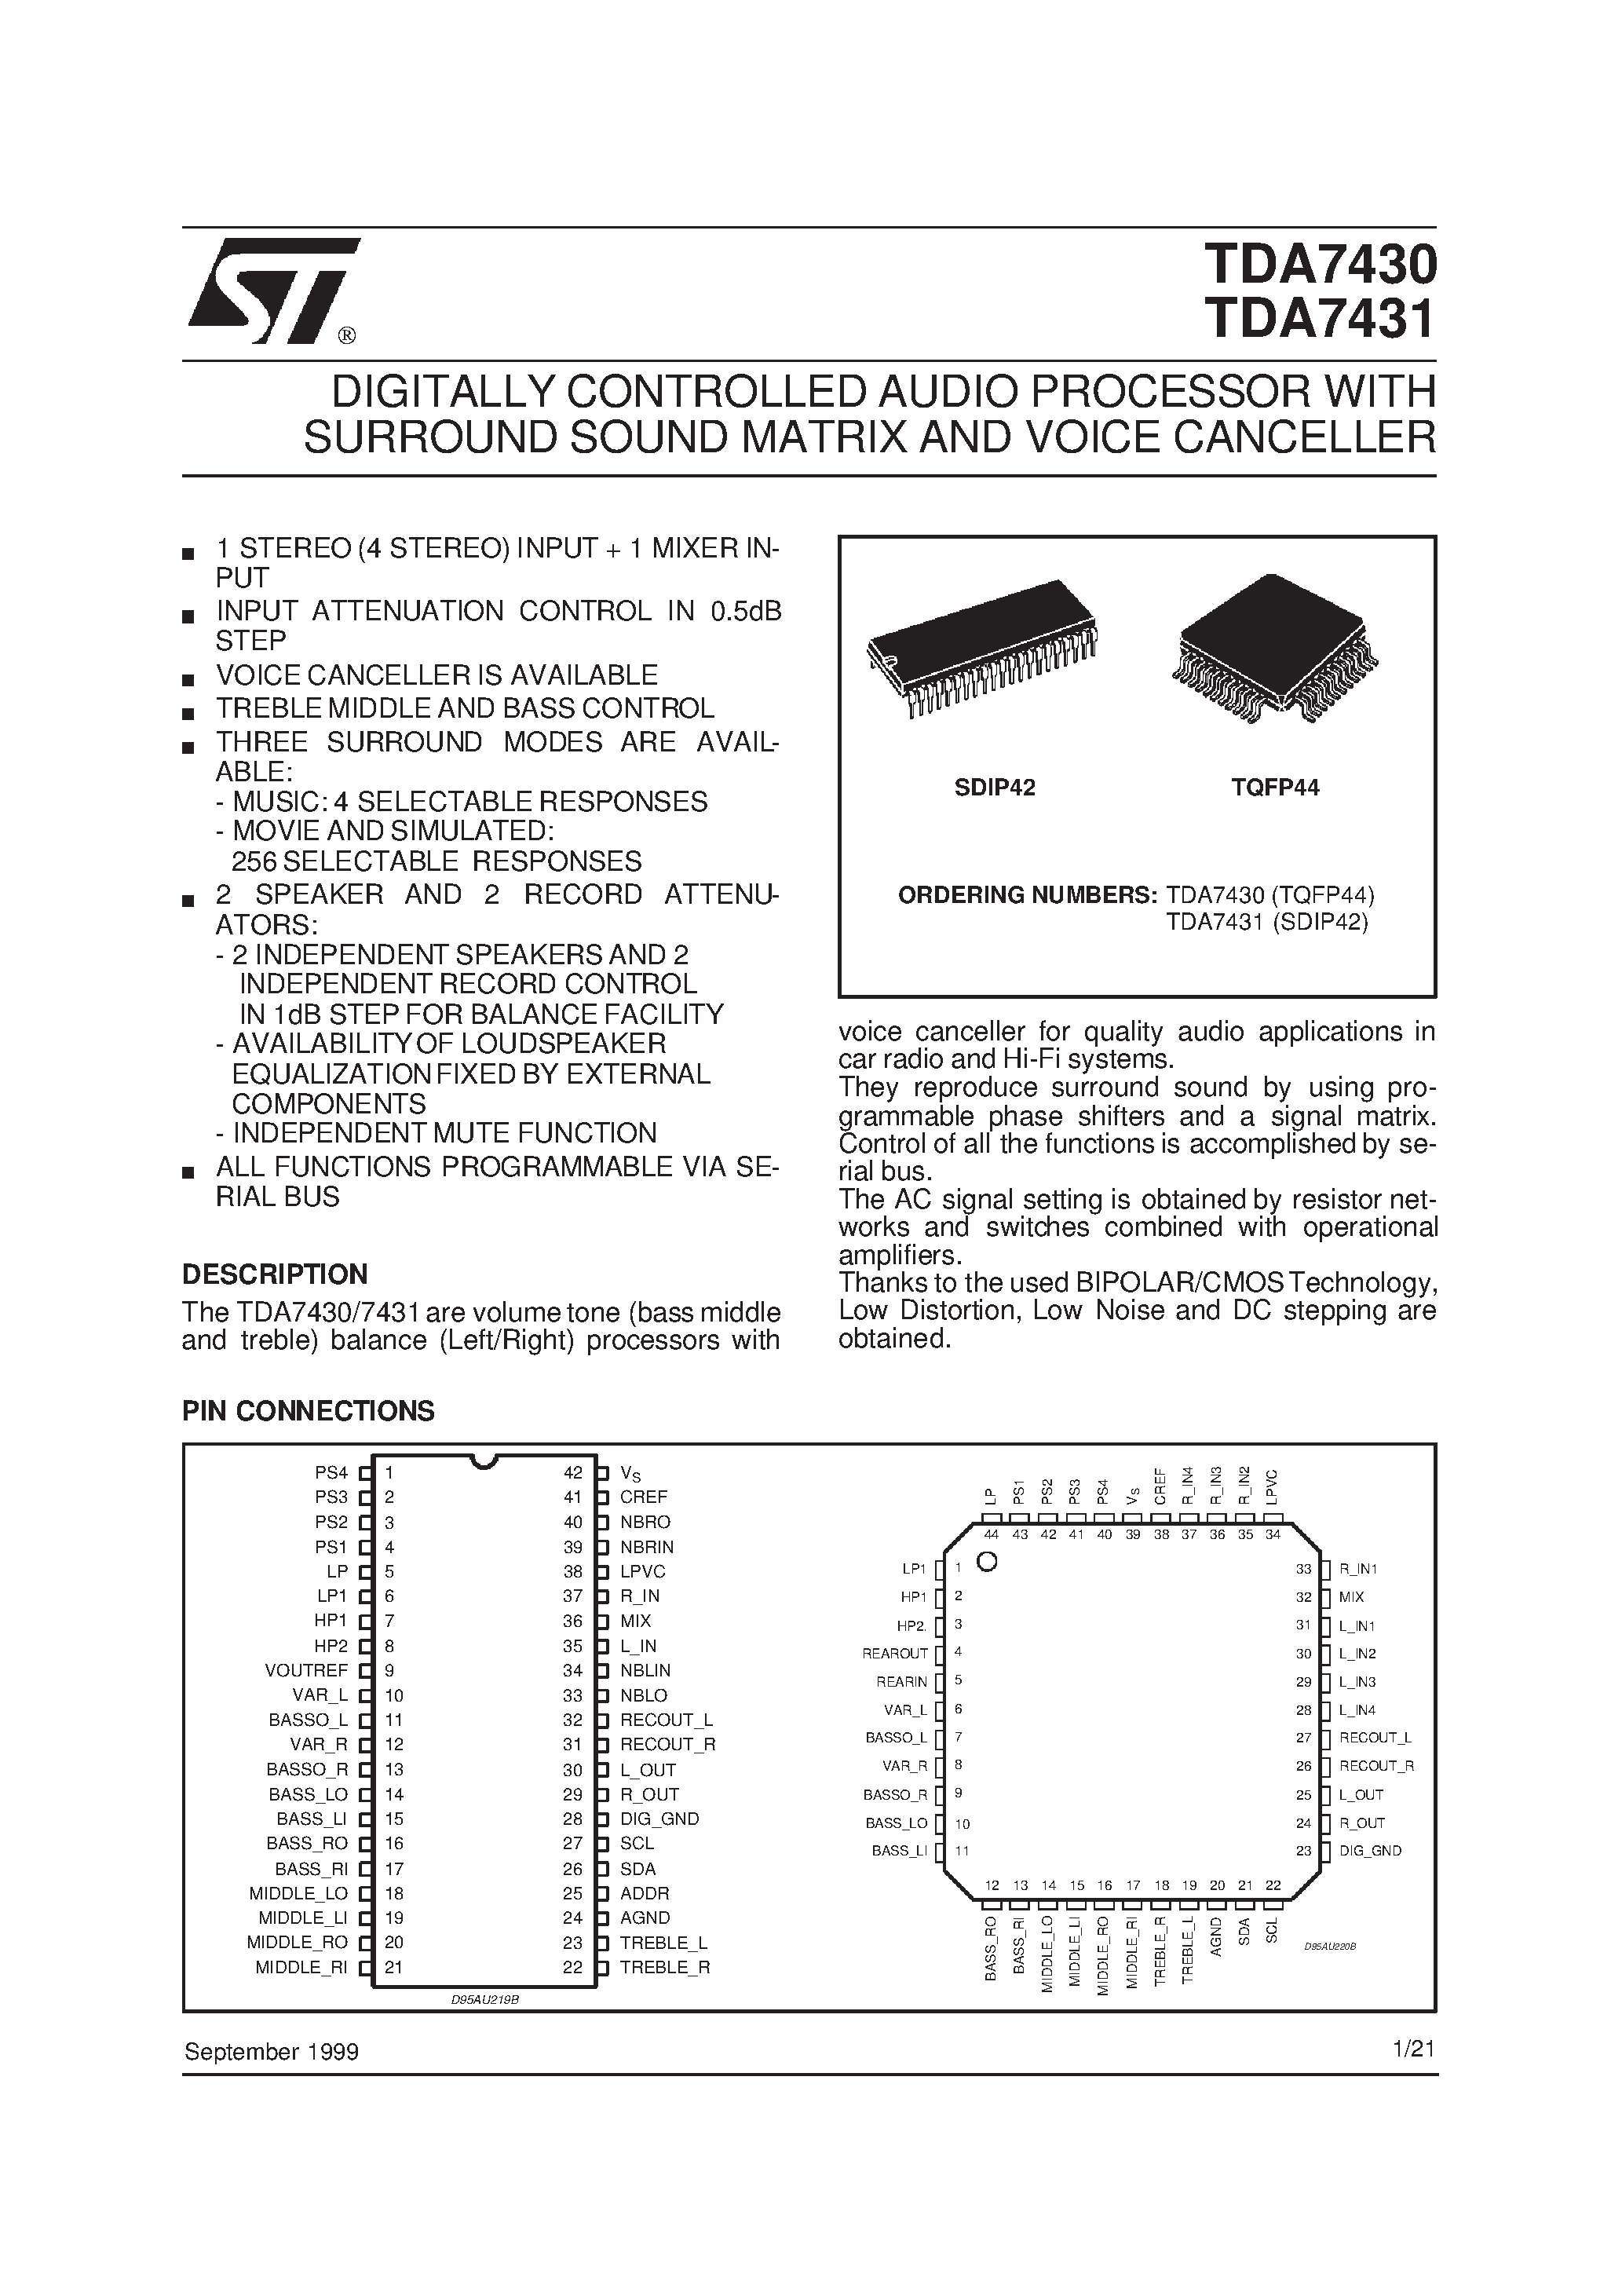 Datasheet 7430 - DIGITALLY CONTROLLED AUDIO PROCESSOR WITH SURROUND SOUND MATRIX AND VOICE CANCELLER page 1